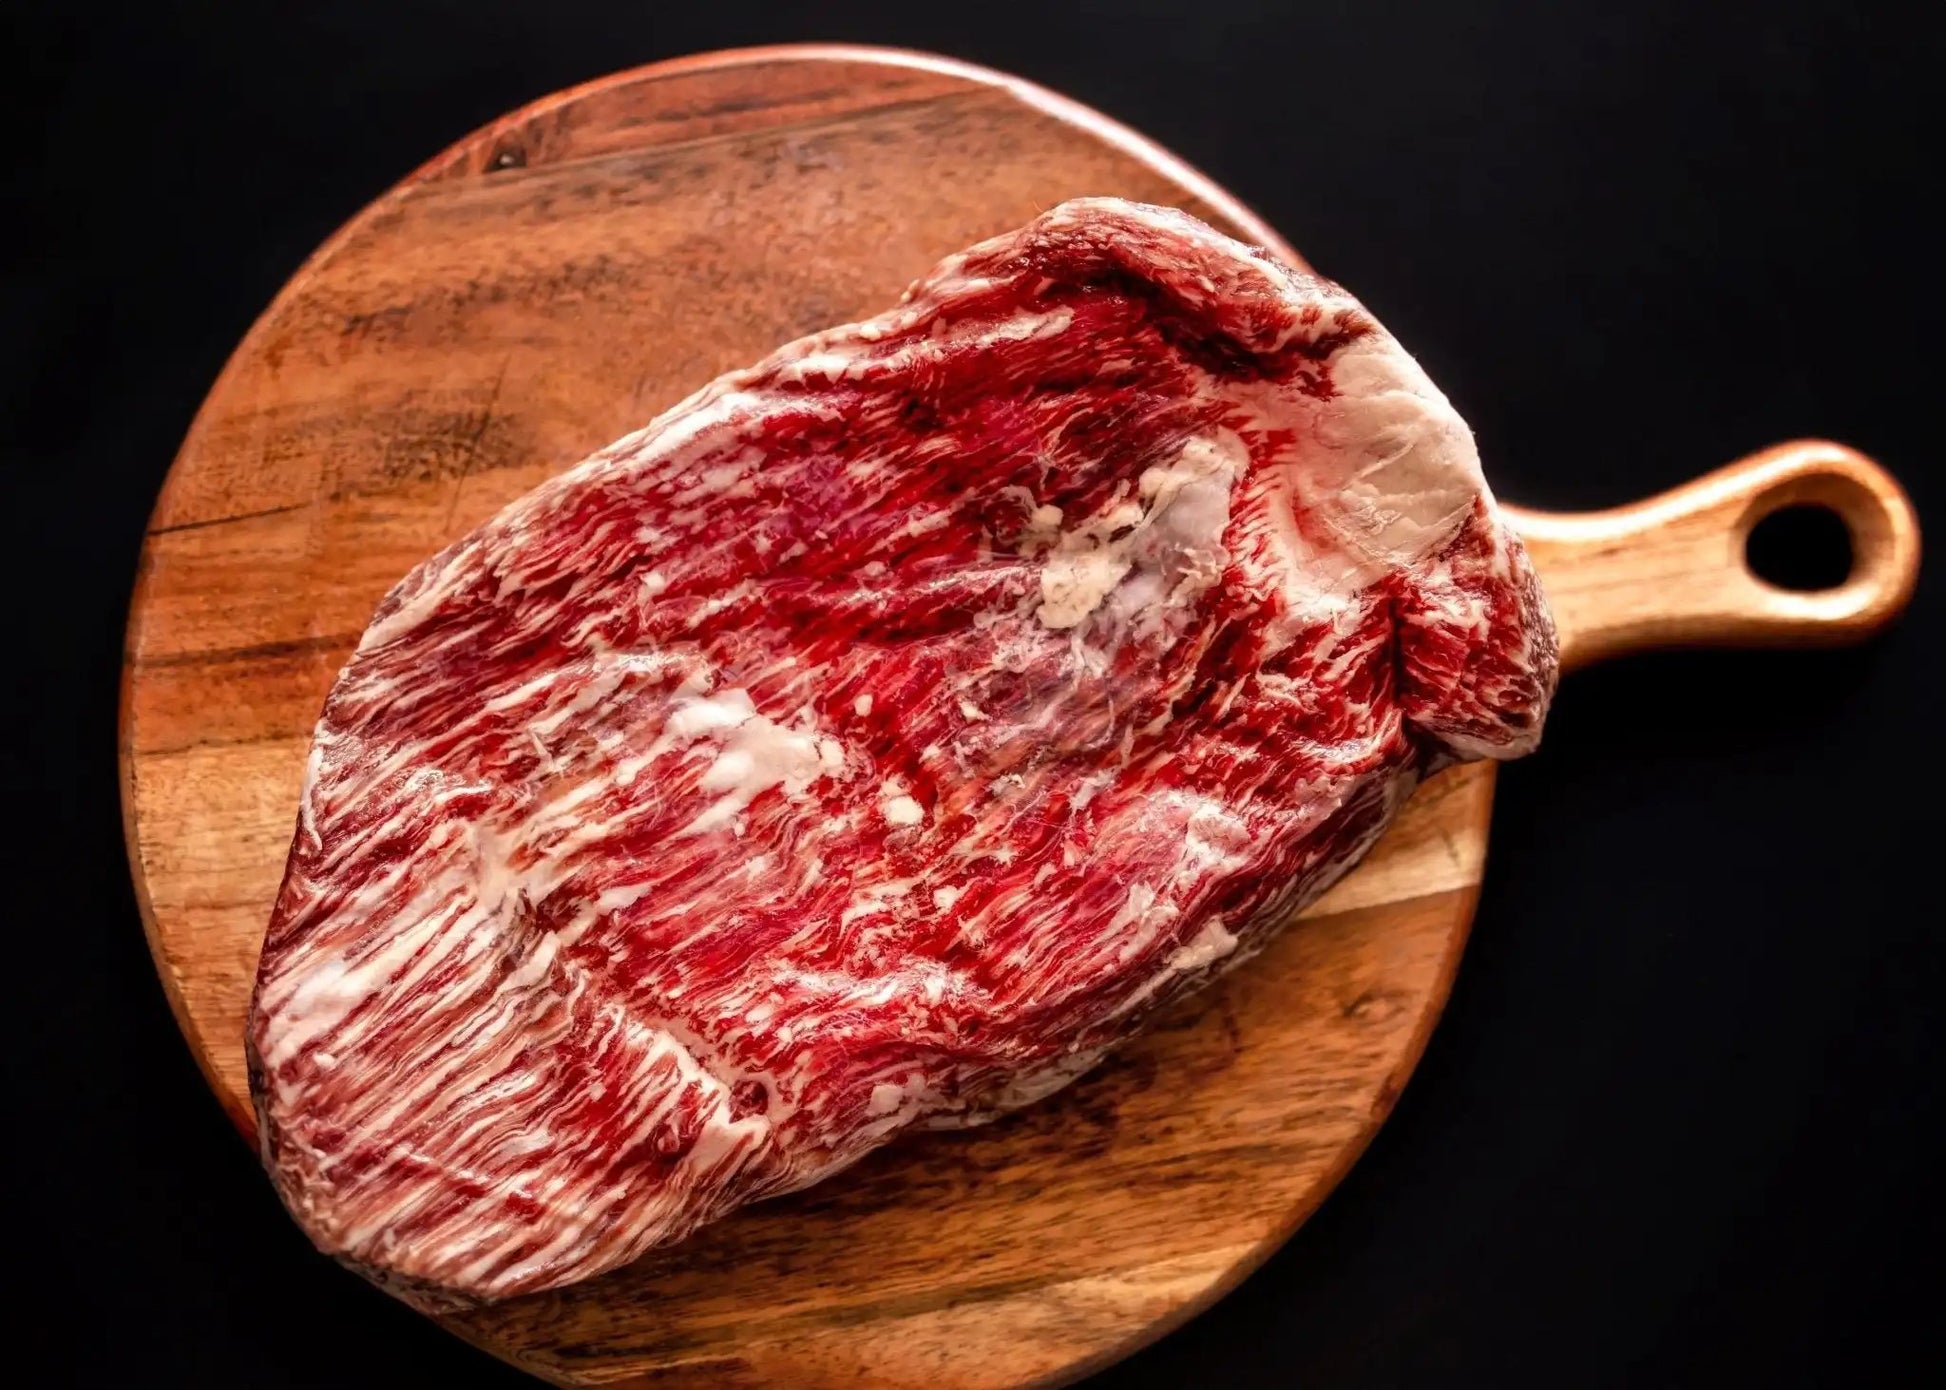 100% All-Natural Grass-Fed Pasture-Raised Wagyu Flank SteakElevate your favorite dishes with Hufeisen Ranch's 100% All-Natural Grass-Fed Pasture-Raised Wagyu Flank Steak. Perfect for fajitas, tacos, steak sandwiches, or even100%The Hufeisen-Ranch (WYO Wagyu)